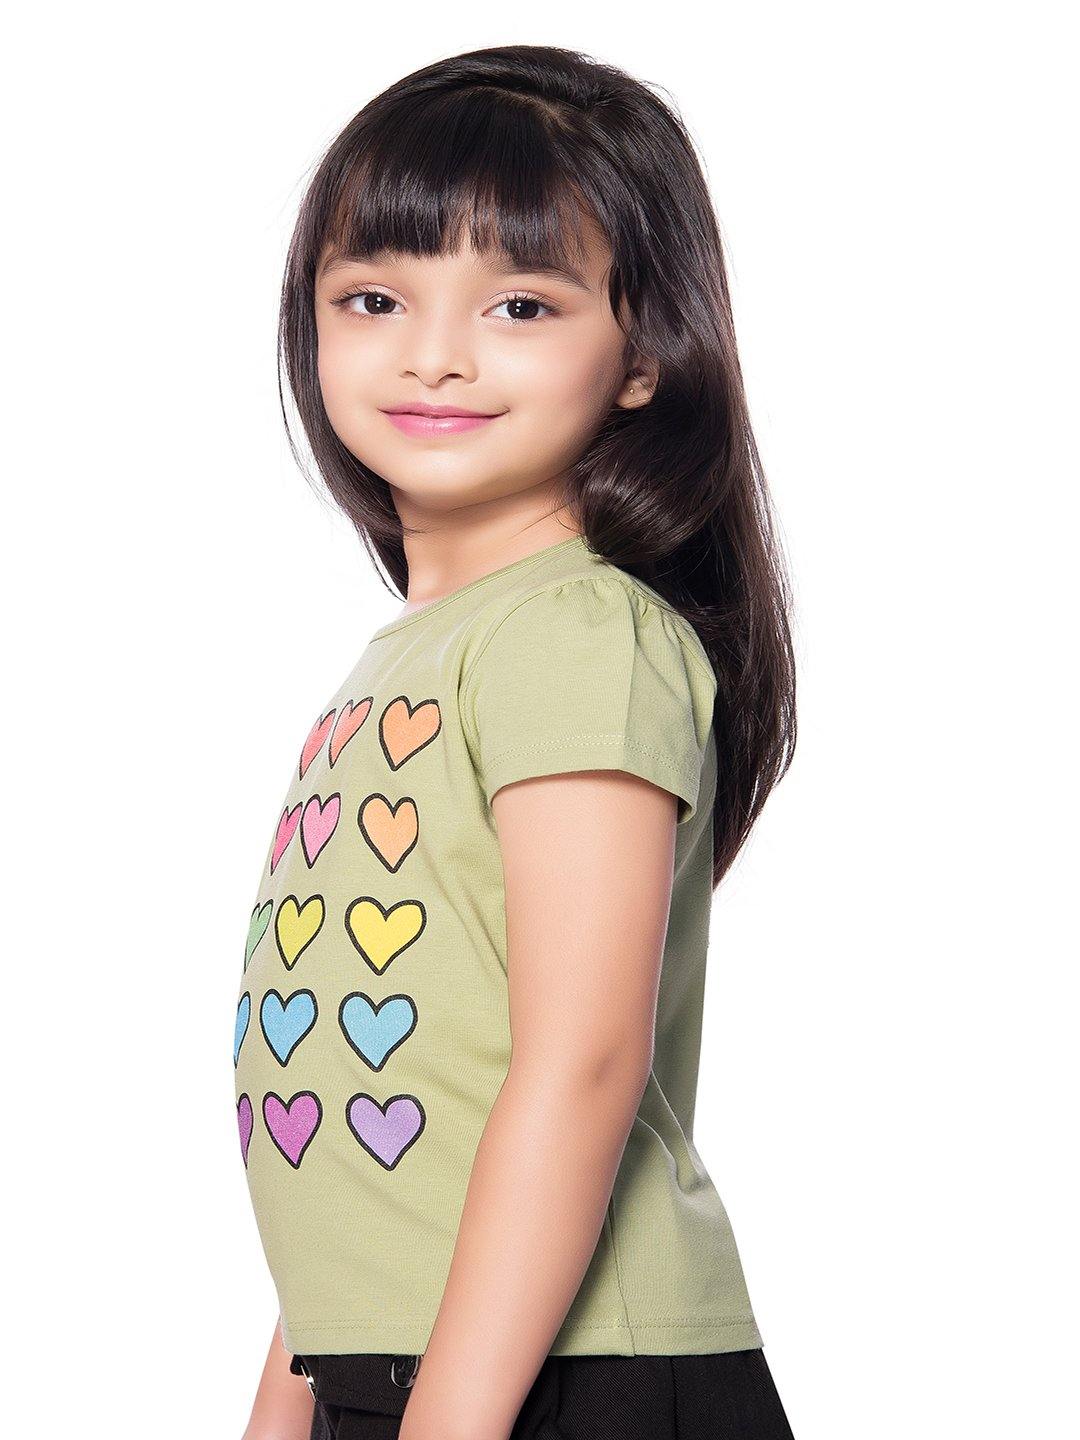 Tiny Baby Green Colored Top - T-107 Green - TINY BABY INDIA shop.tinybaby.in